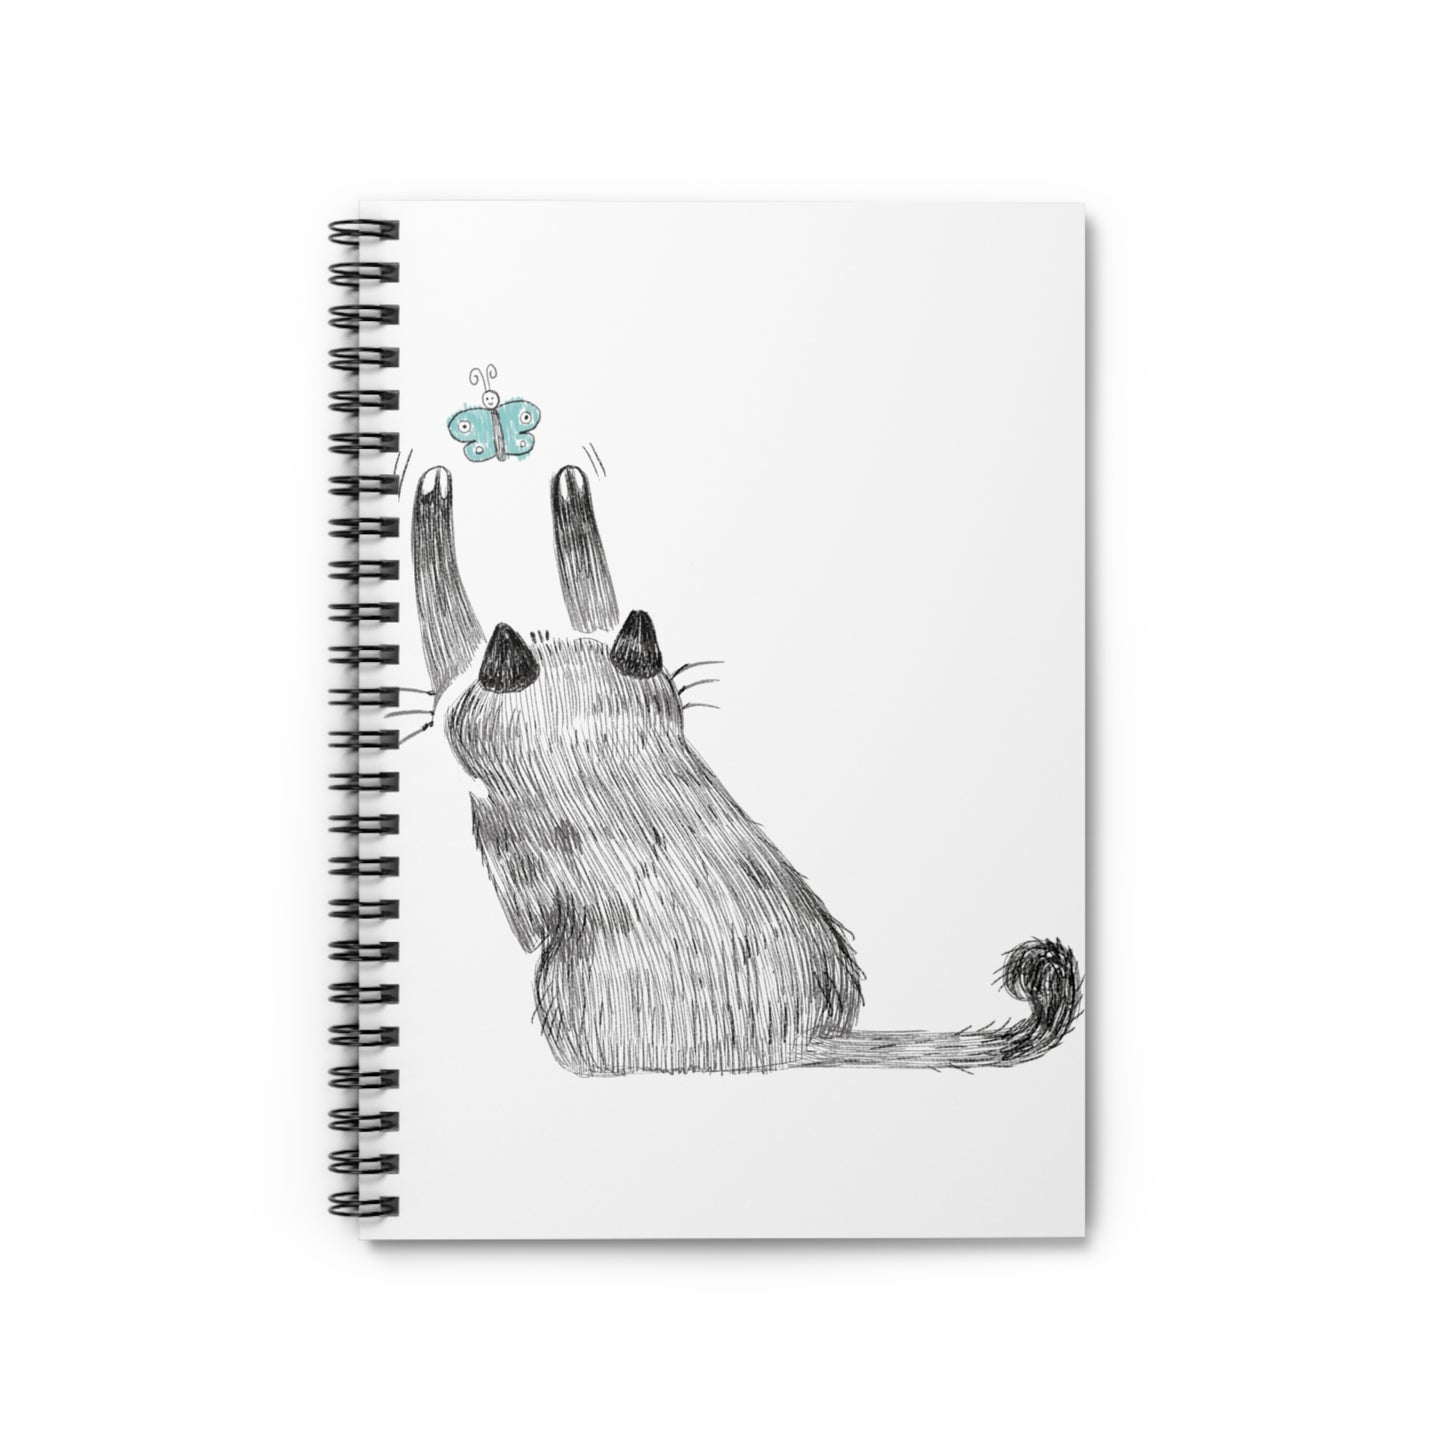 I'll Miss You: Spiral Notebook - Log Books - Journals - Diaries - and More Custom Printed by TheGlassyLass